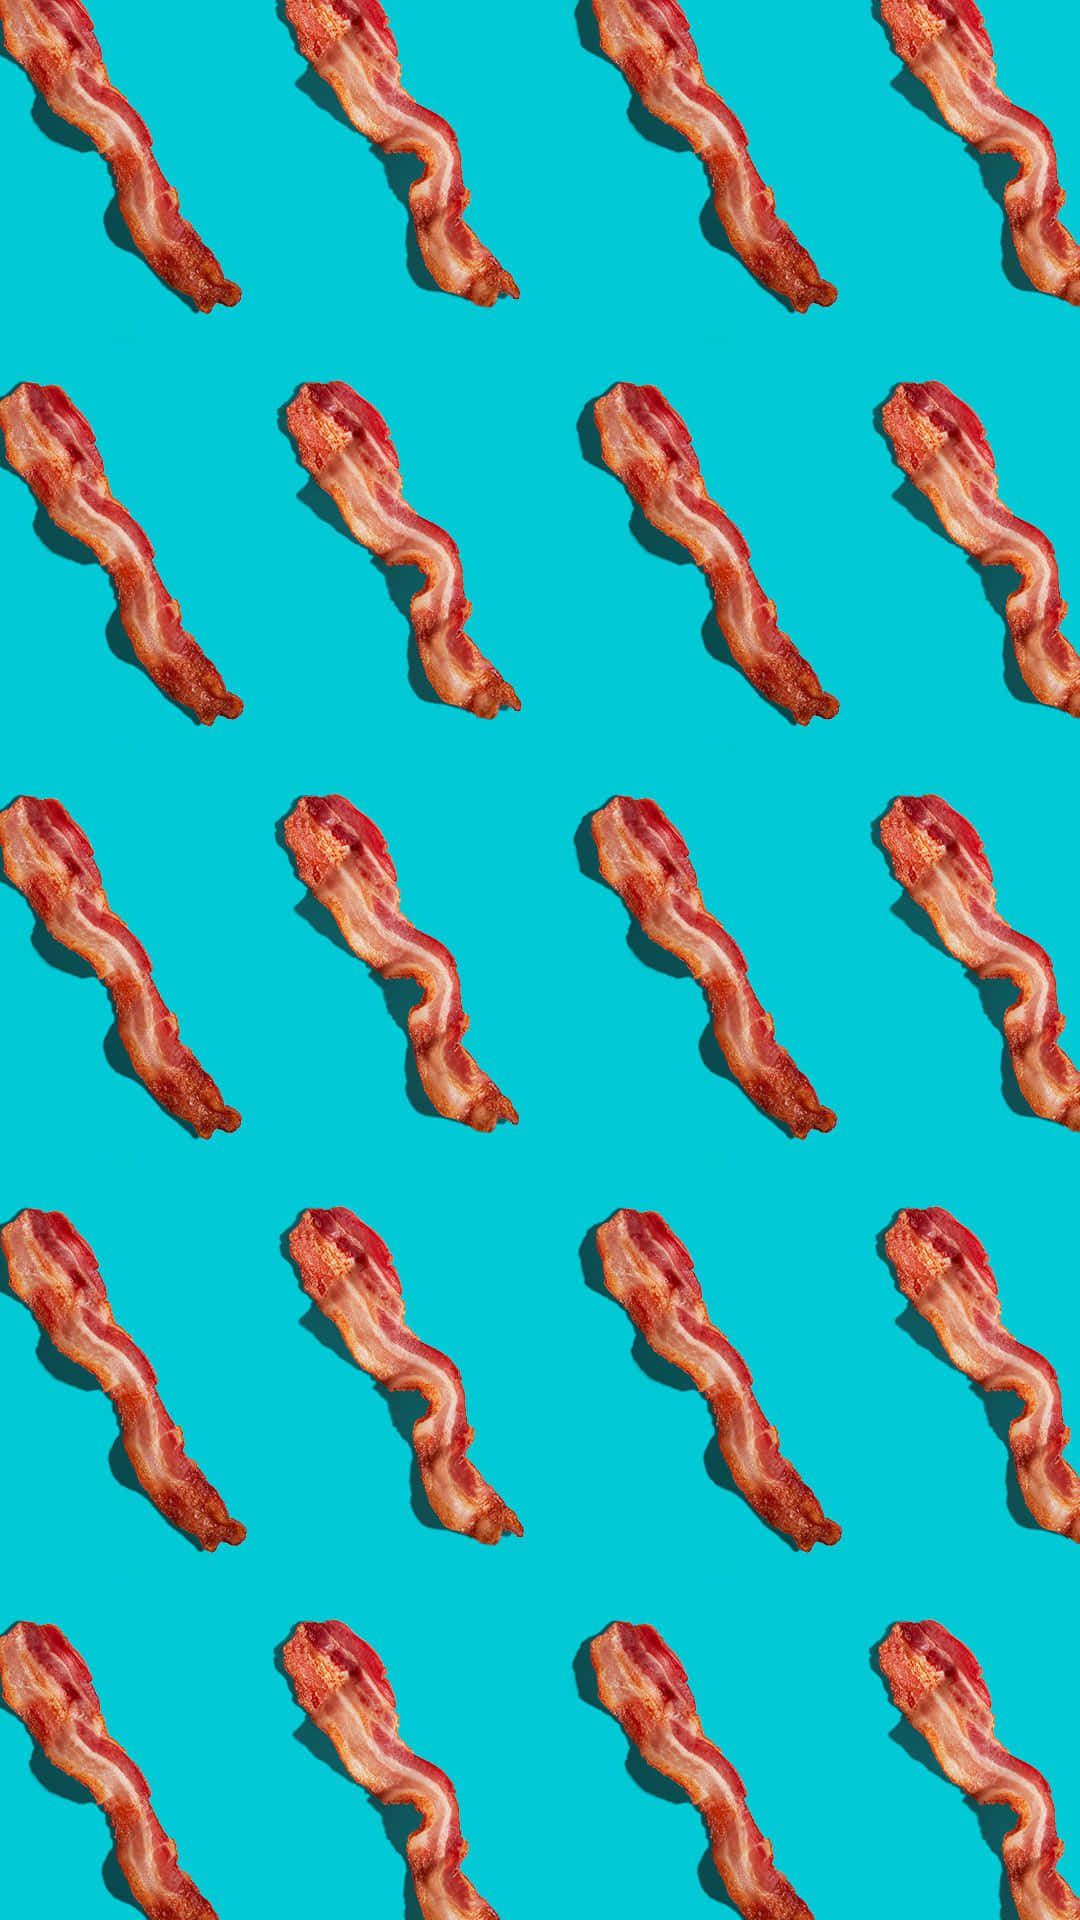 Patterned Bacon Stripson Blue Background Background